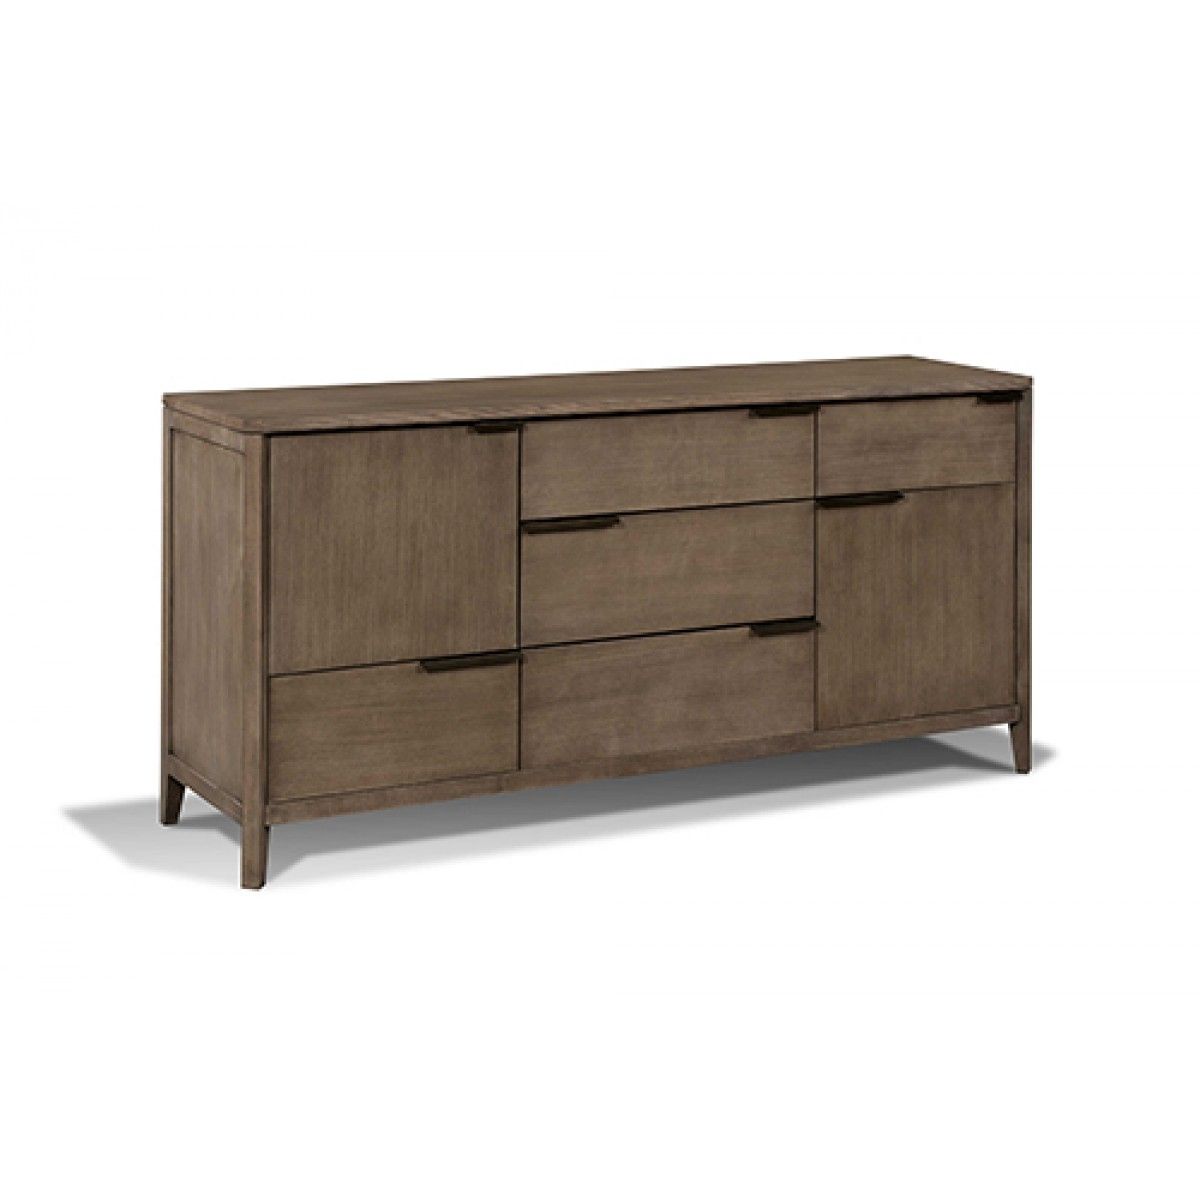 Harden Artistry Candice Buffet Within Current Candice Ii Sideboards (View 11 of 20)